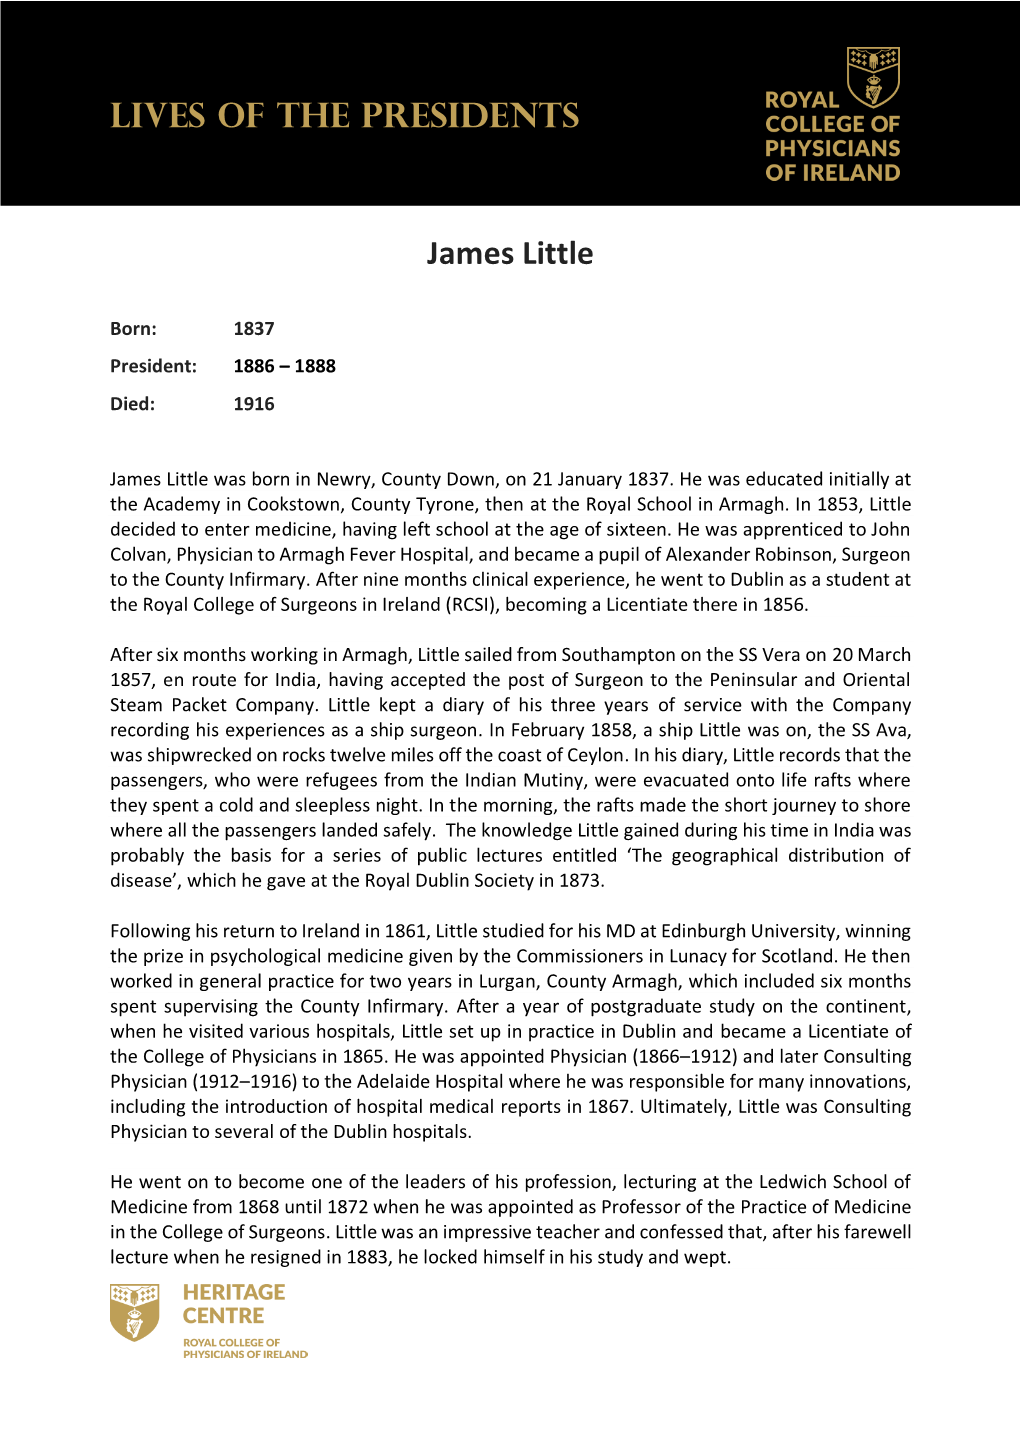 LIVES of the PRESIDENTS James Little